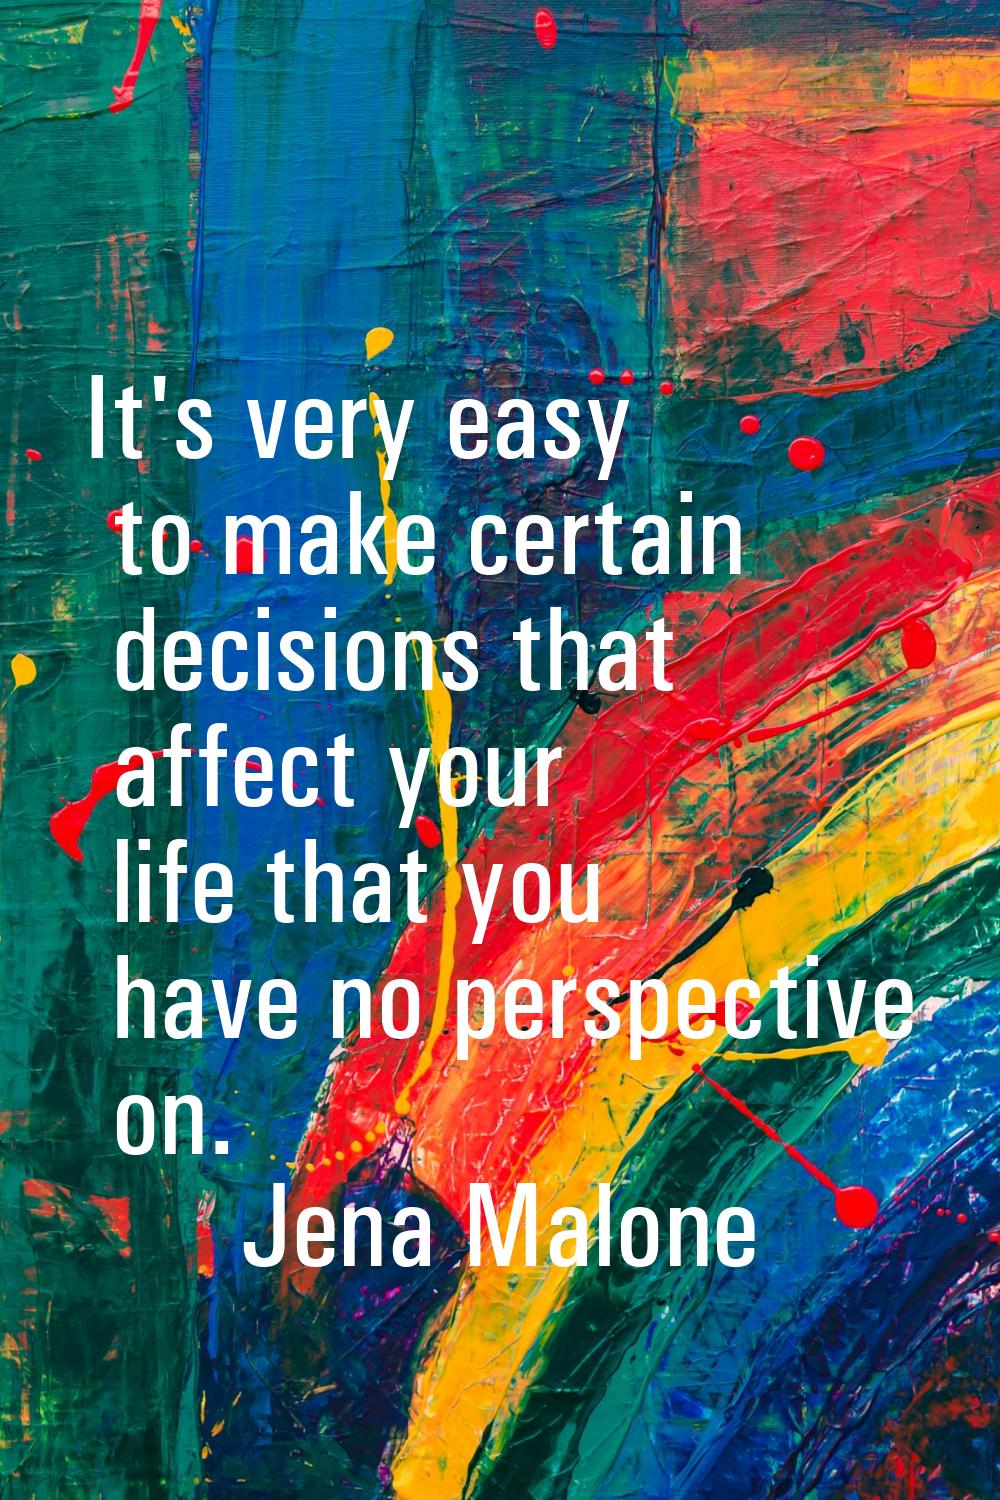 It's very easy to make certain decisions that affect your life that you have no perspective on.